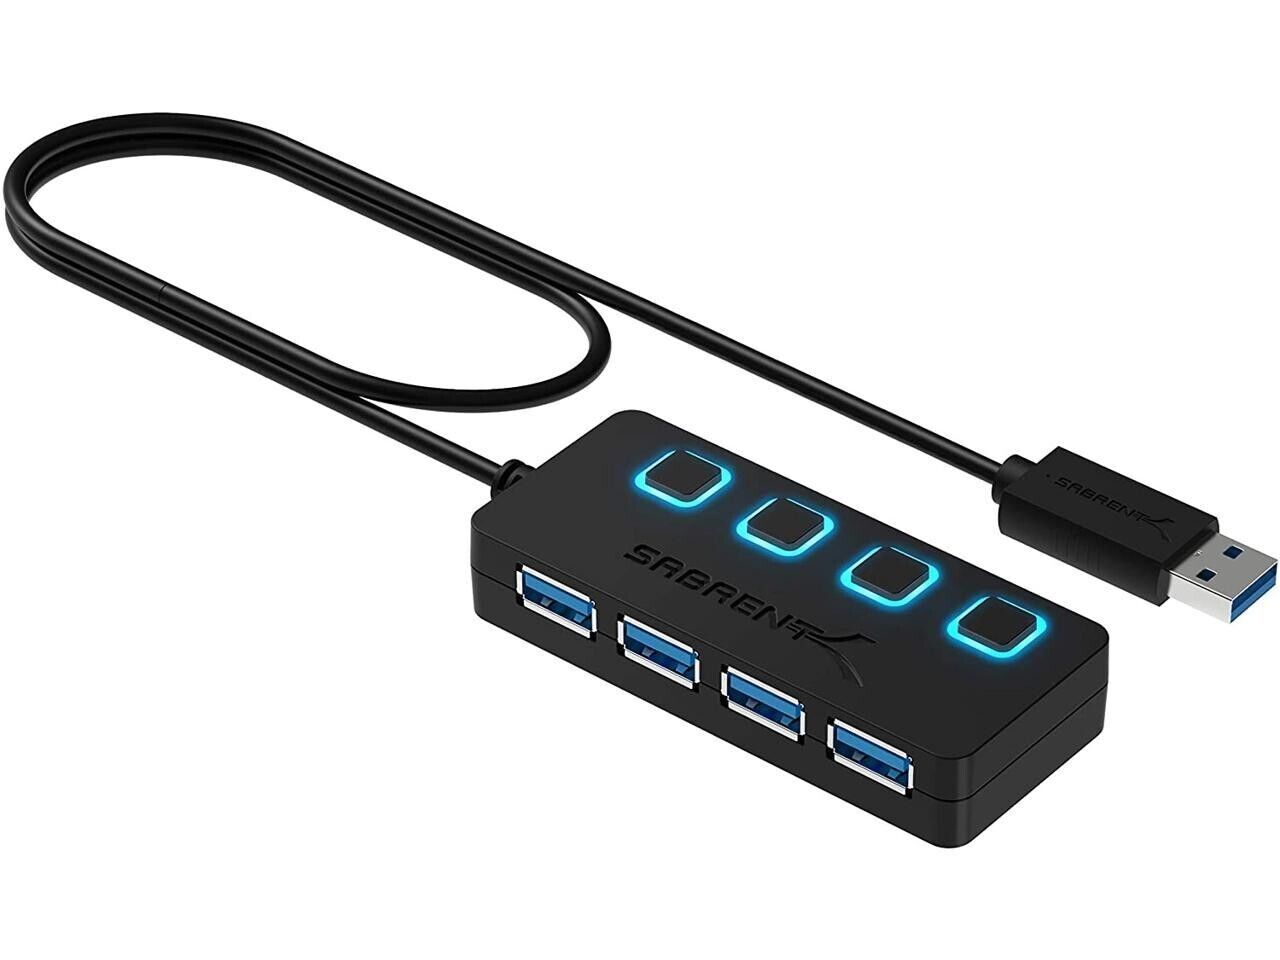 Sabrent HB-UM43 4-Port USB 3.0 Portable thin HUB with Power Switches